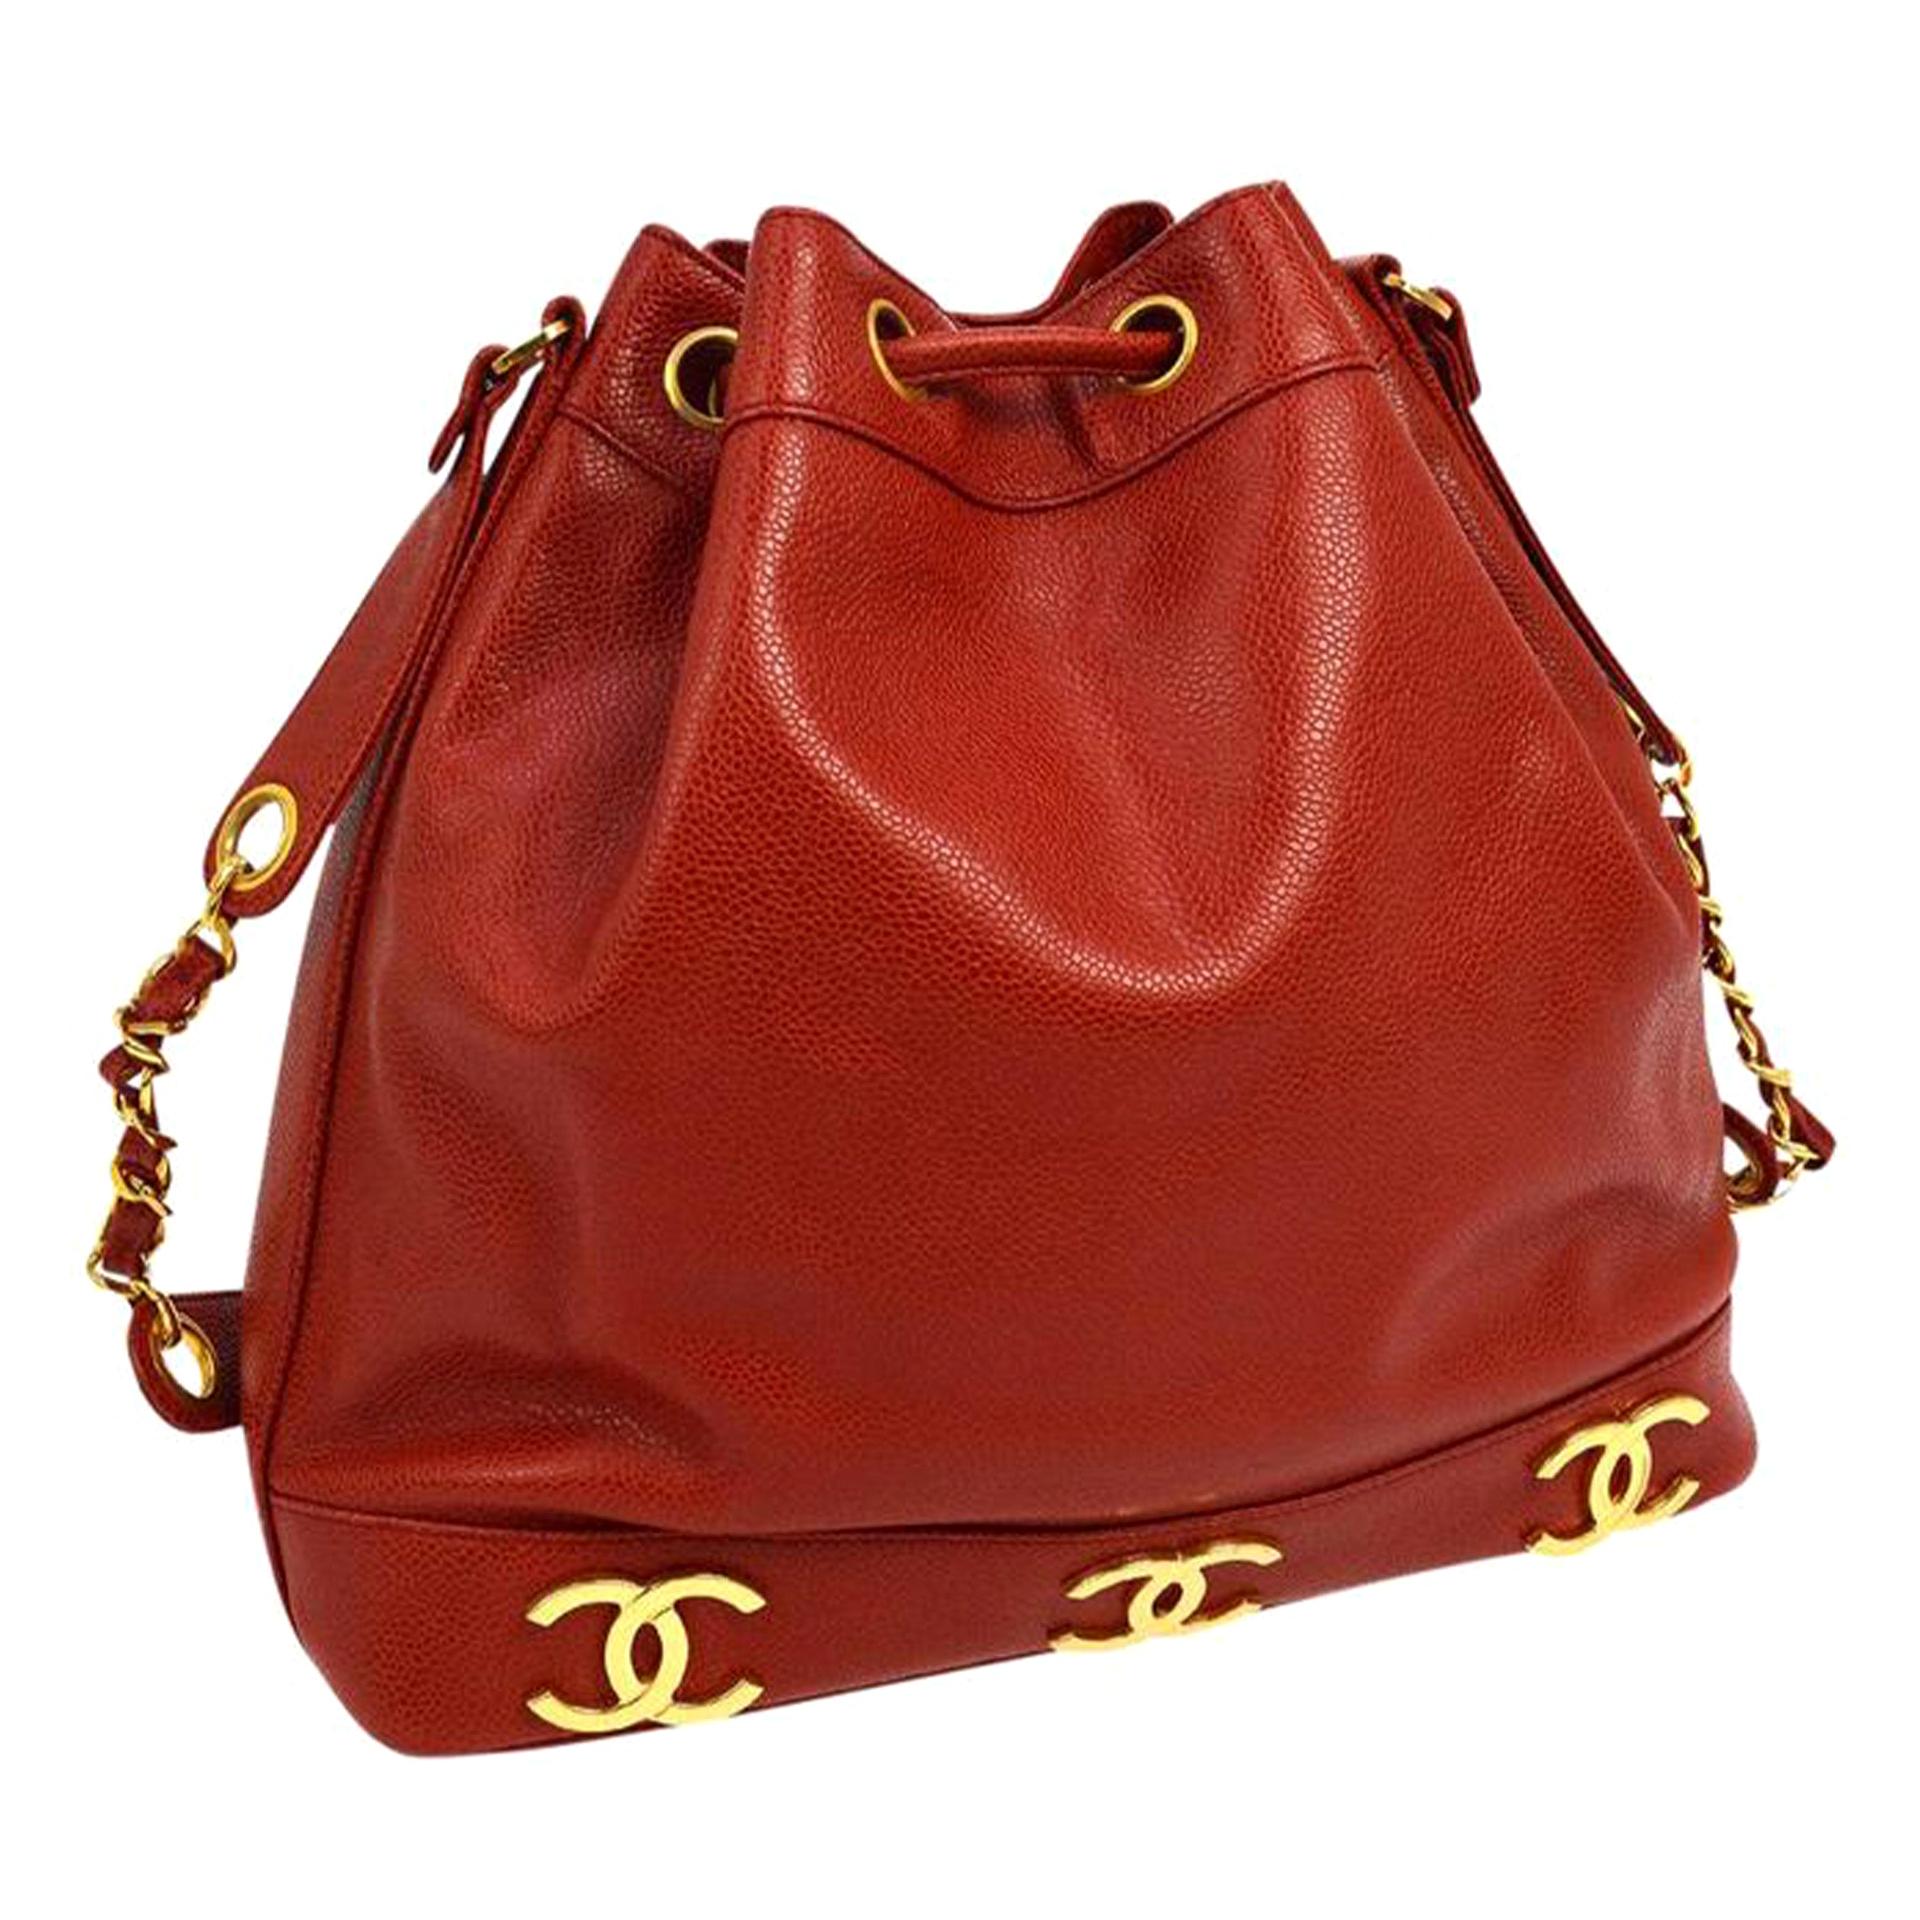 Chanel Rare Red Vintage 90's Bucket Red Leather Cross Body Bag 